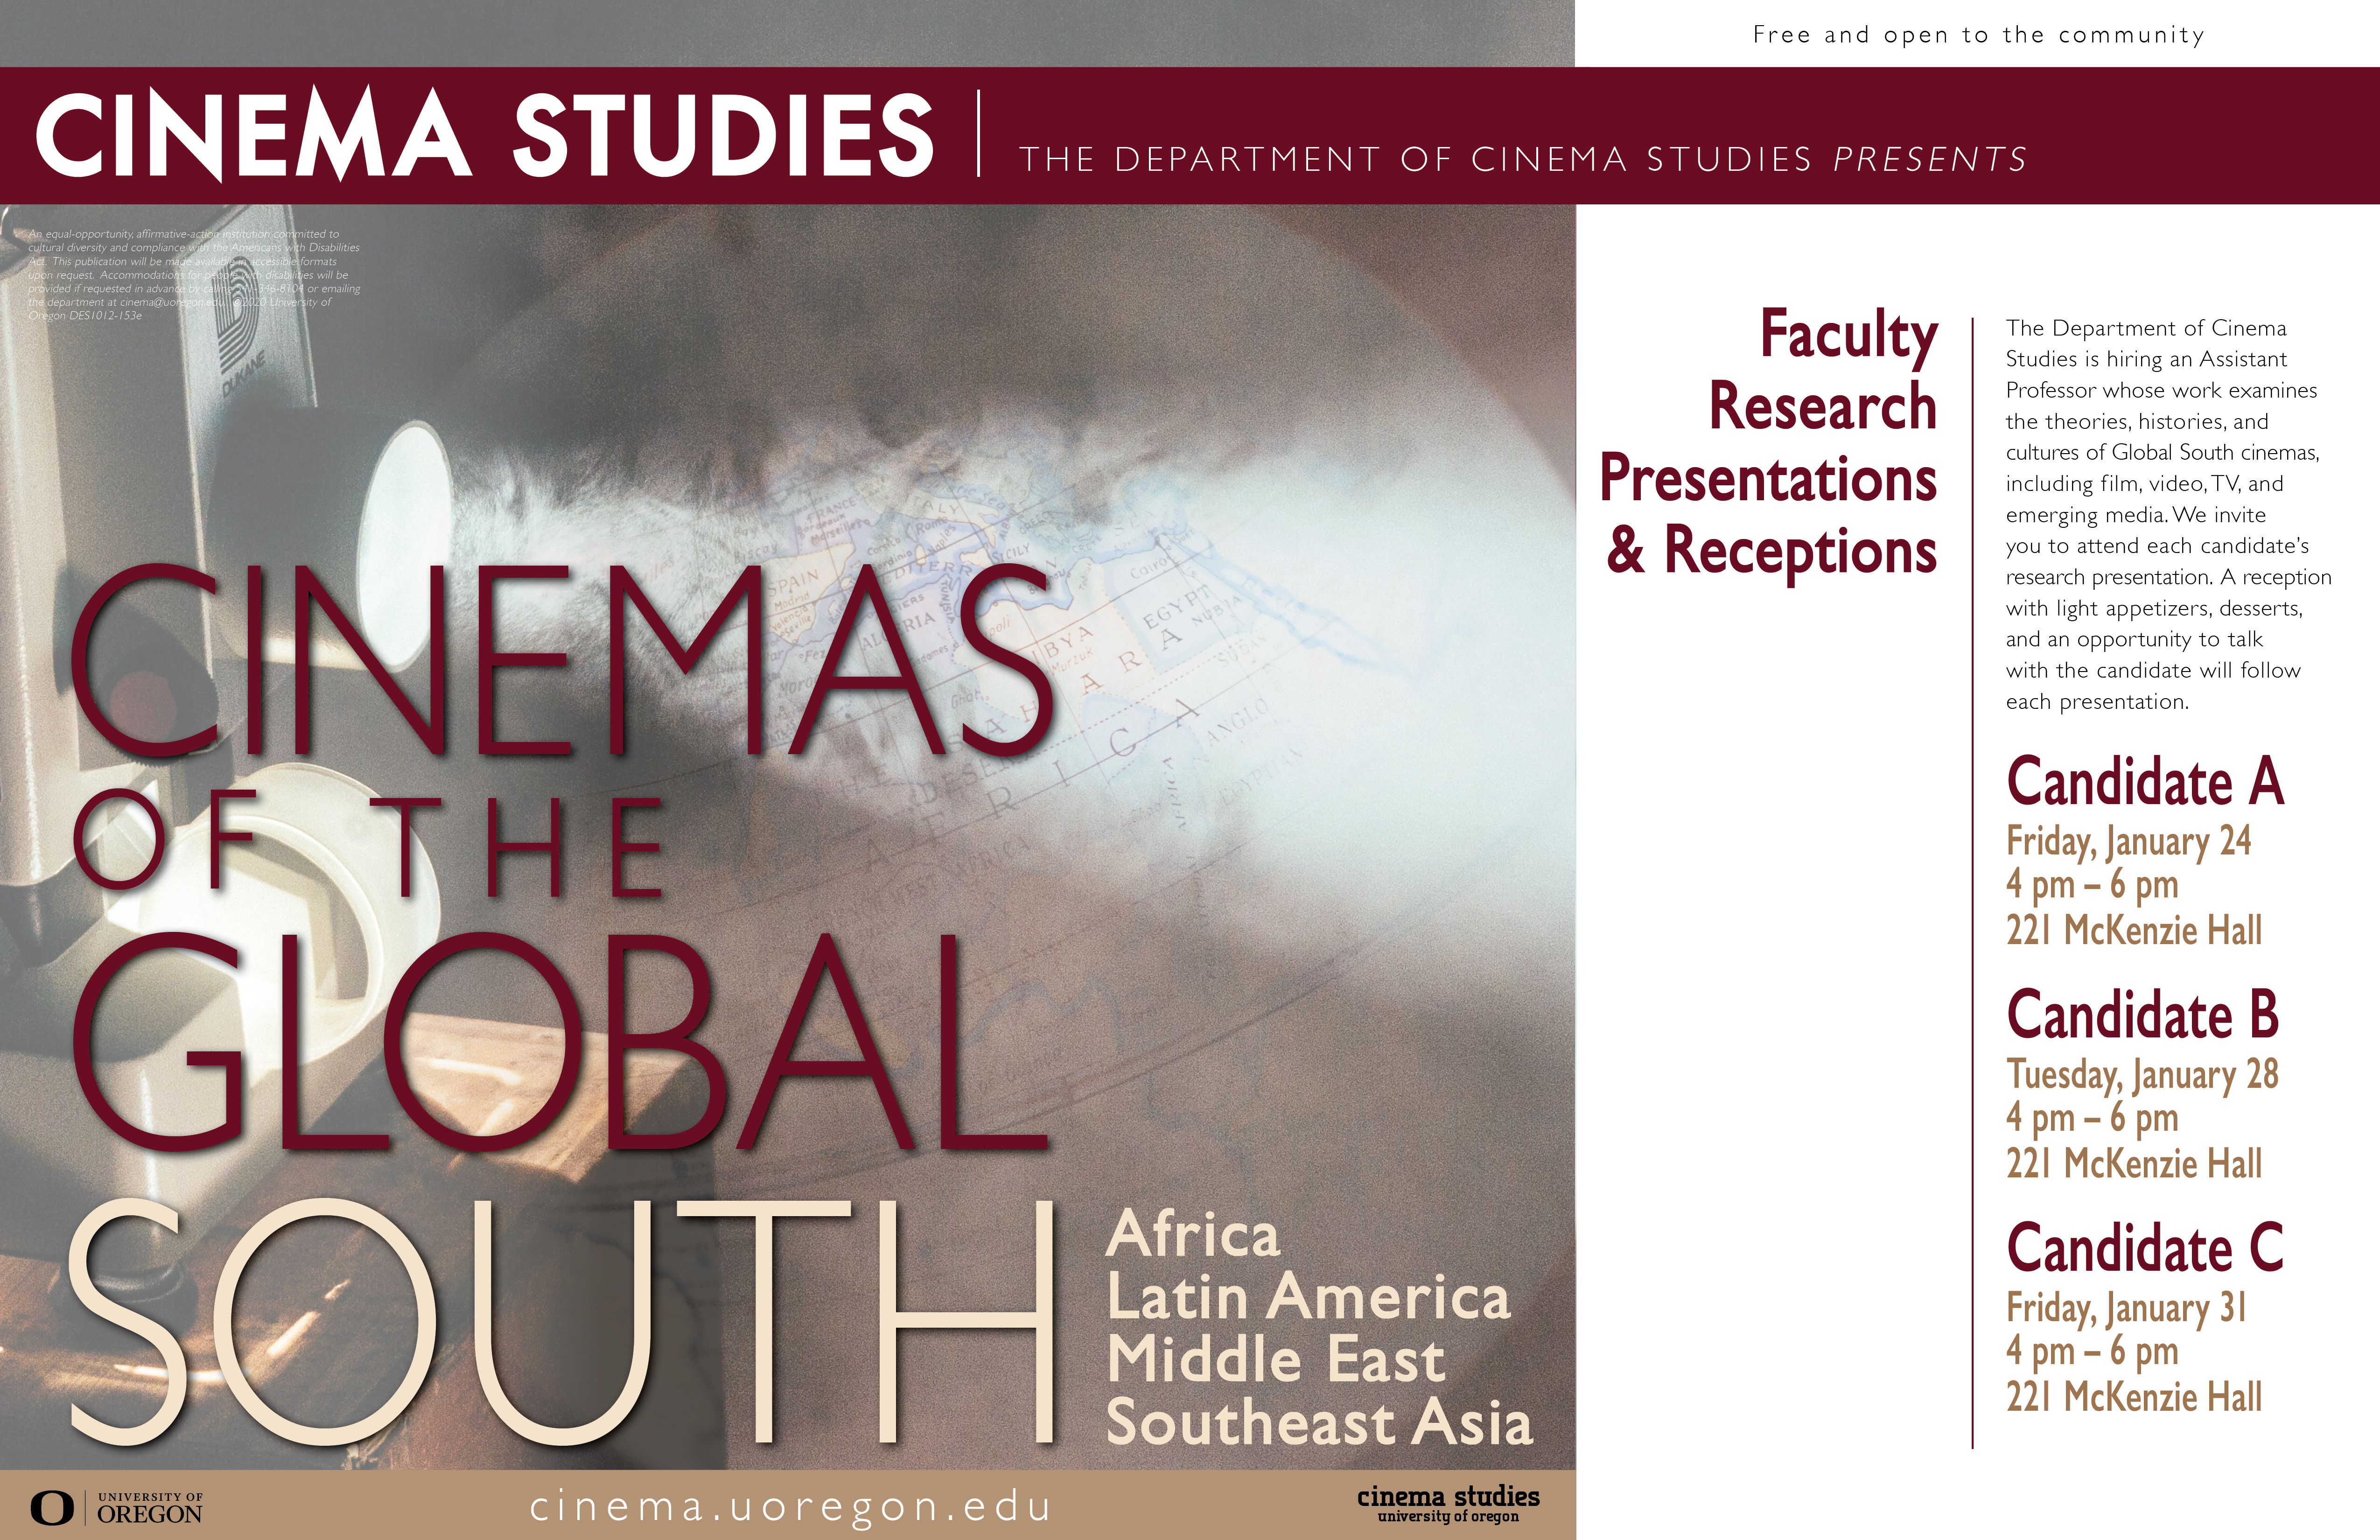 Cinemas of the Global South Faculty Candidate Research Presentations and Receptions